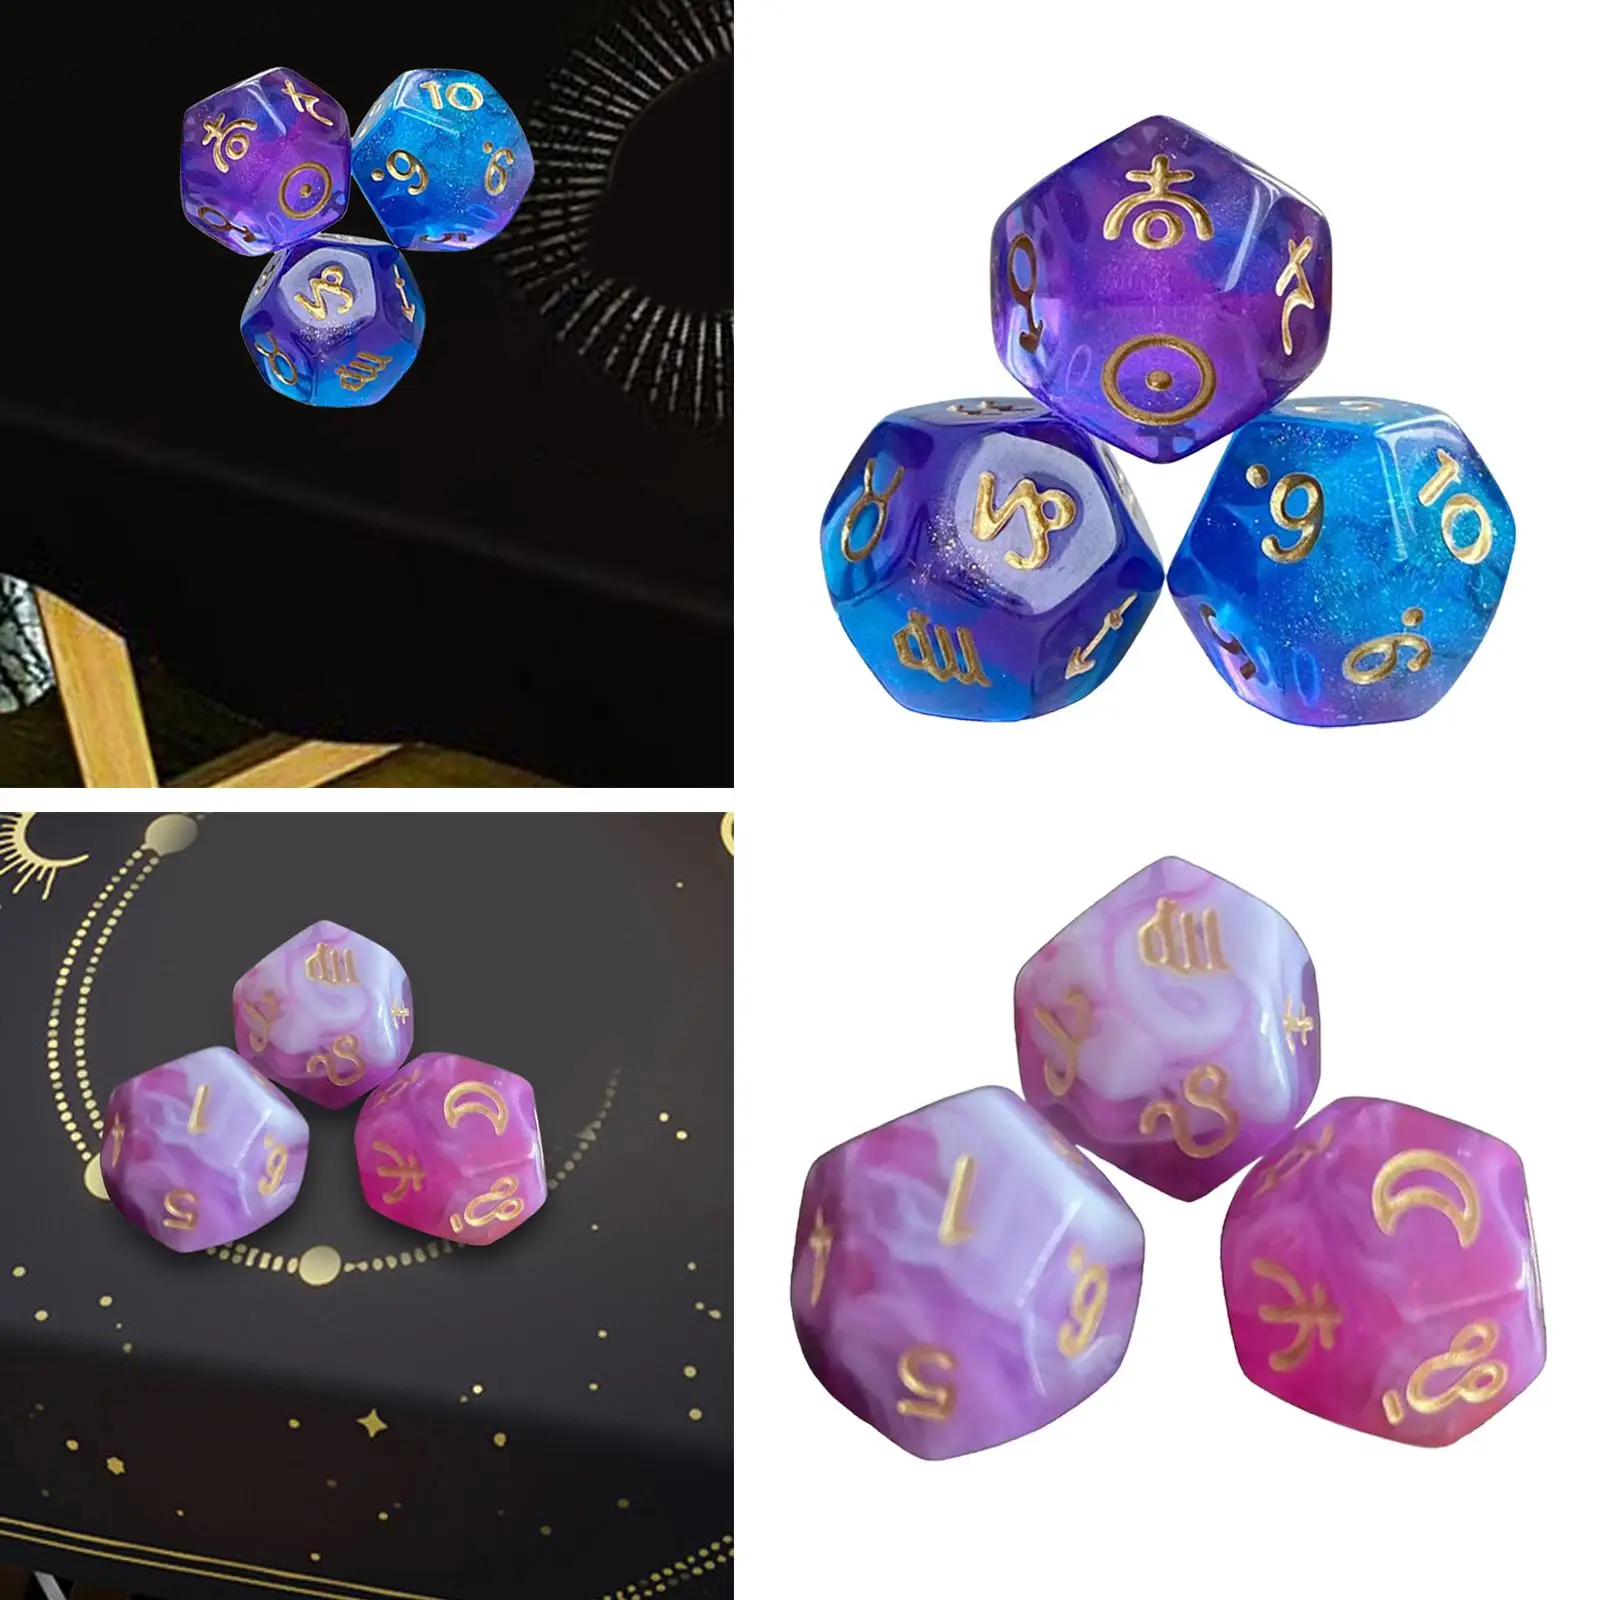 3x Astrology Signs Dice Easy to Read Multi Sided Dices Entertainment Toy Polyhedral Dice for Role Playing Game Teaching Prop